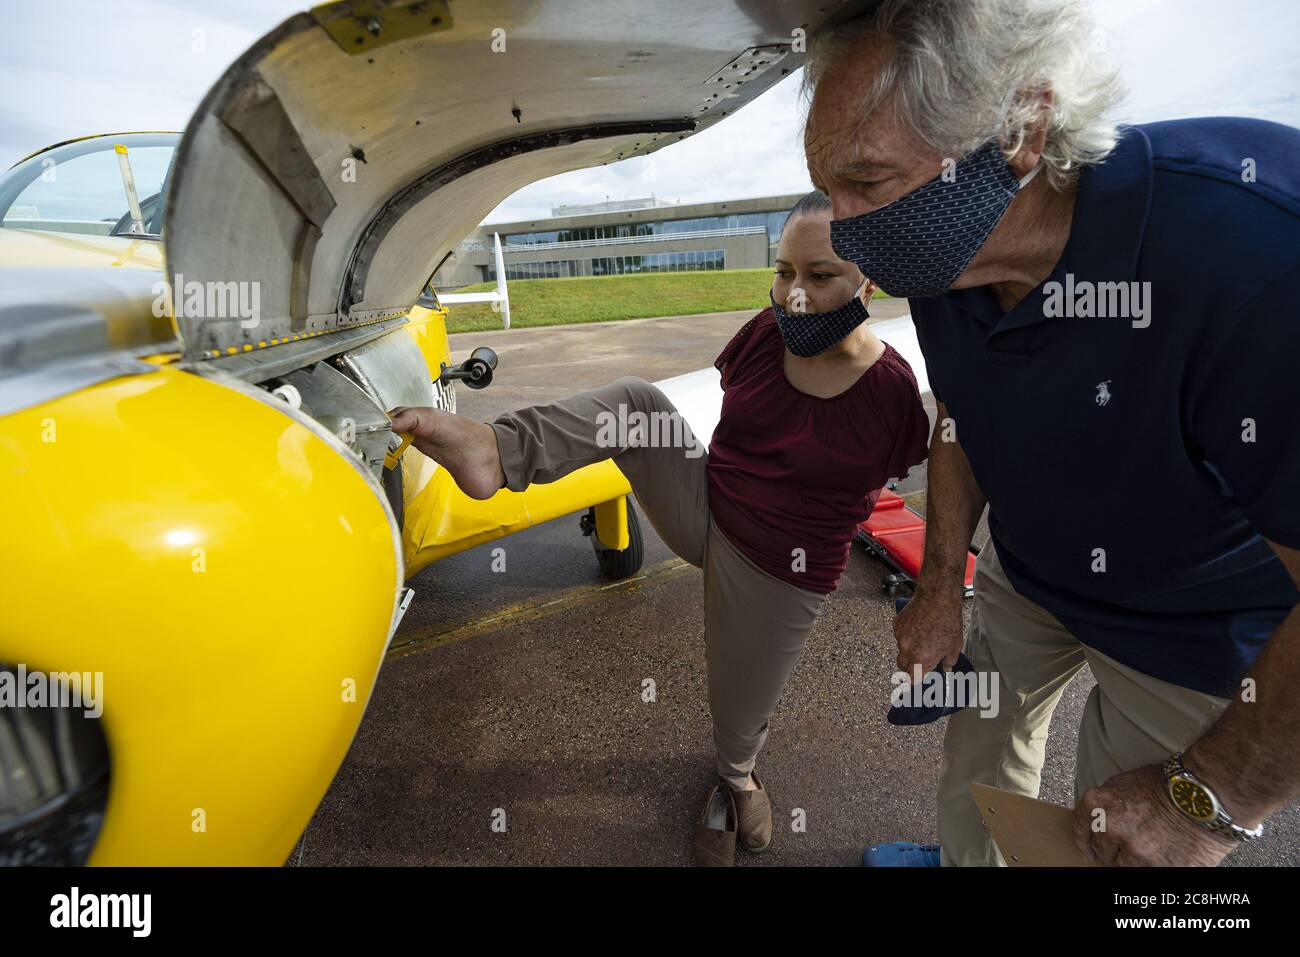 Frederick, United States. 24th July, 2020. Tucson, Arizona, pilot Jessica Cox, who was born without arms and uses her feet and toes in place of hands, checks the oil of her single-engine Ercoupe aircraft with fellow pilot and former Sen. Tom Harkin, D-Iowa, in Frederick, Maryland, Friday, July 24, 2020. Photo by David Tulis/UPI. Credit: UPI/Alamy Live News Stock Photo